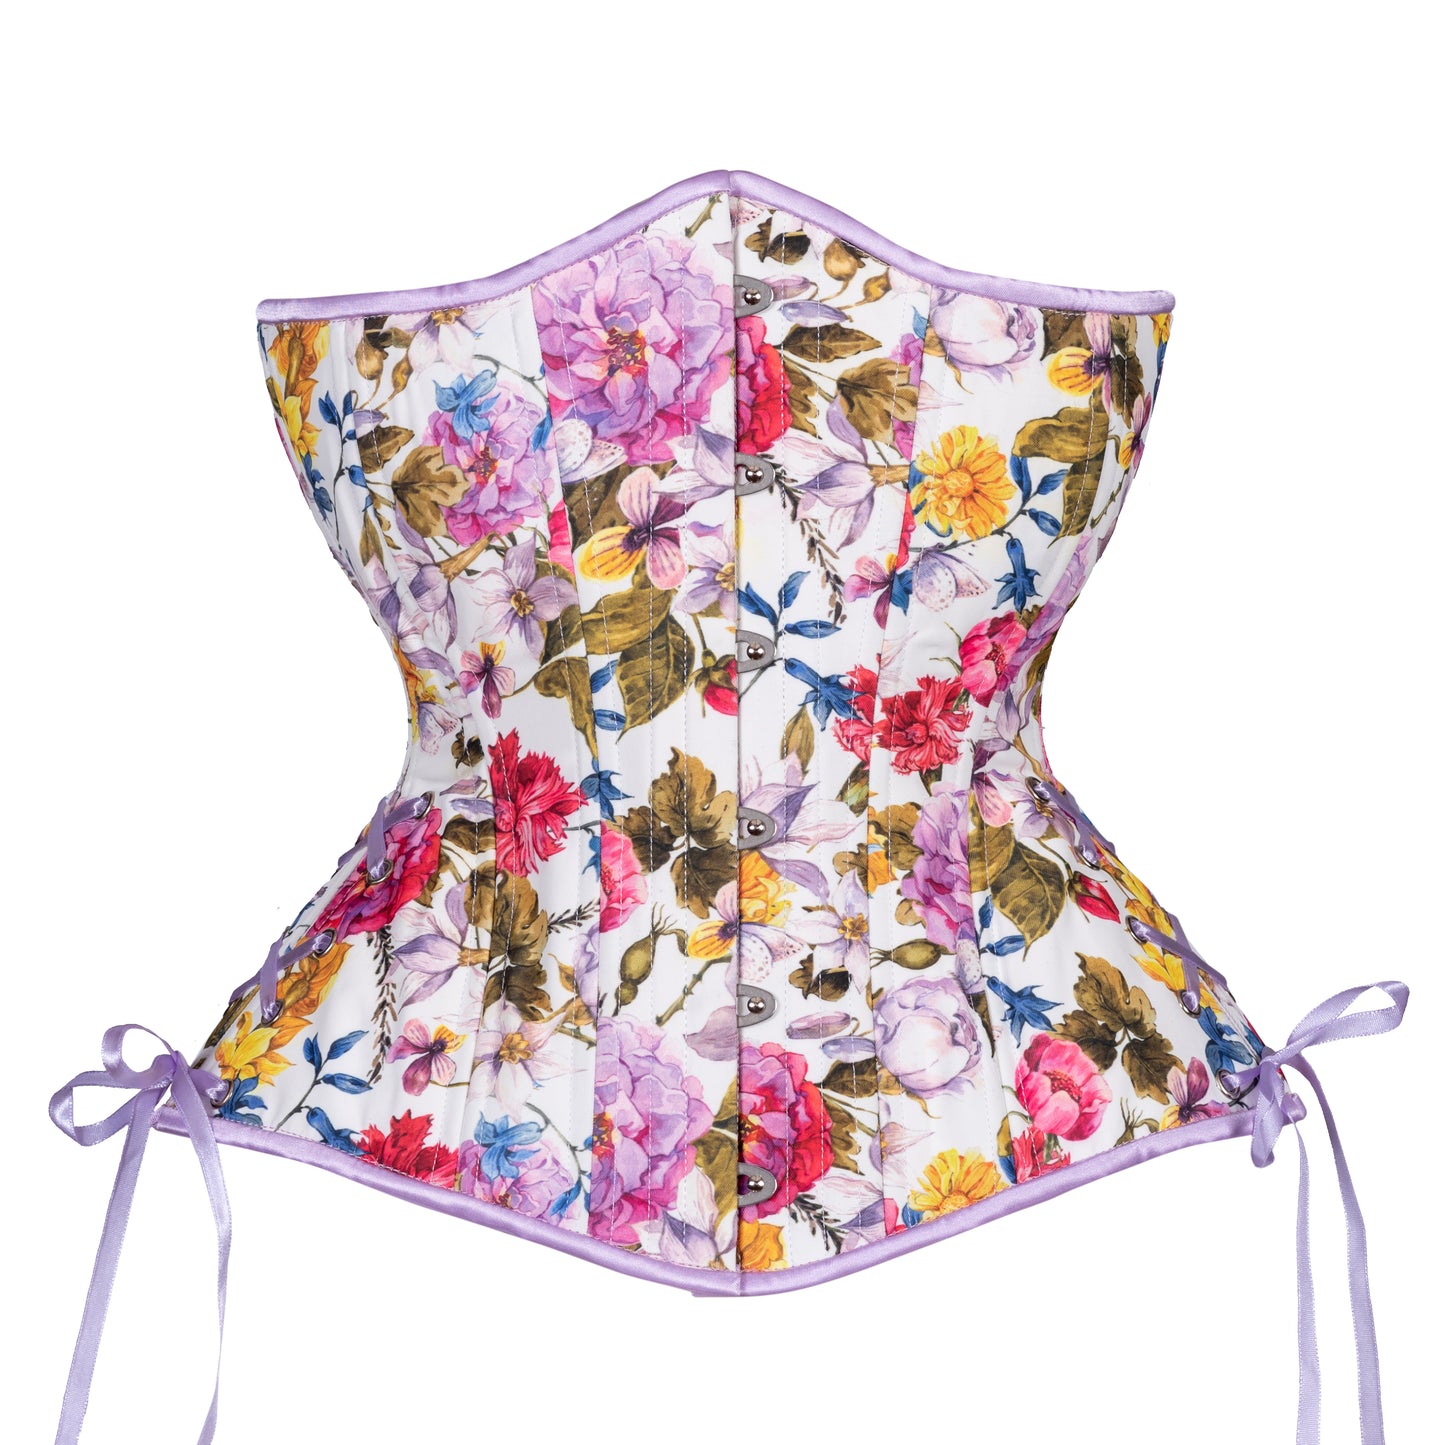 Flowers in Summer Corset, Hourglass Silhouette, Long